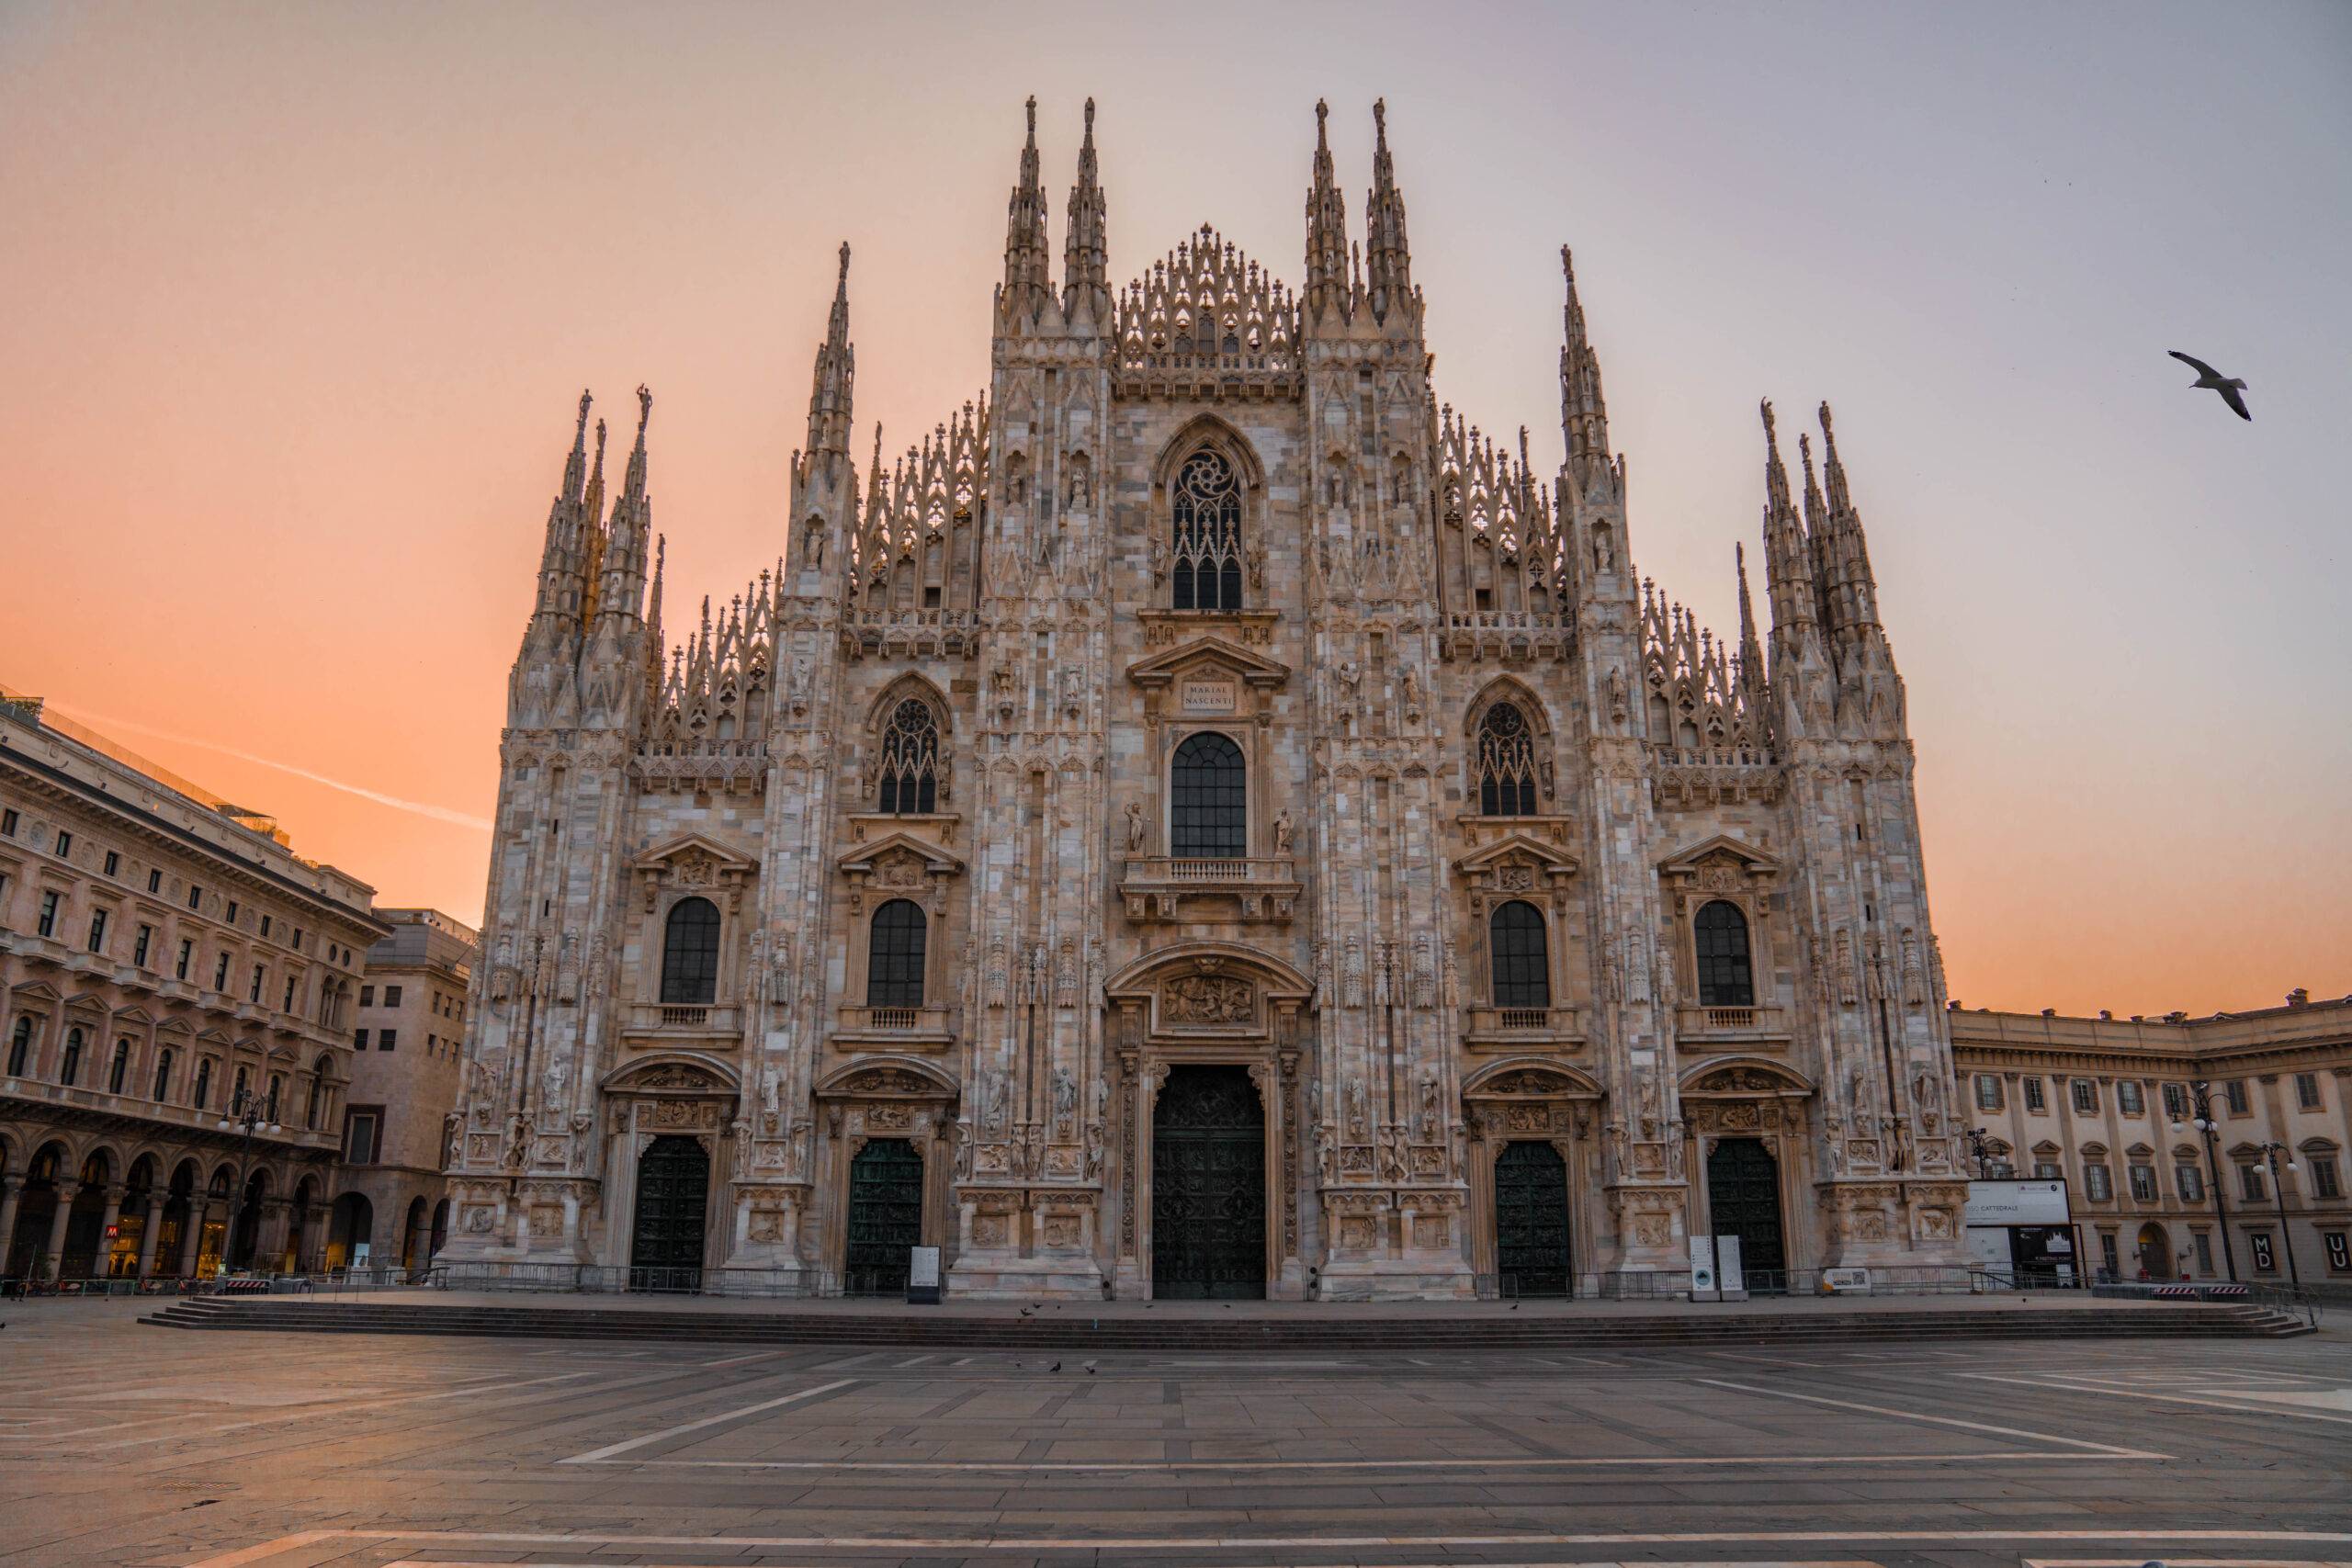 The Best Things to Do in Milan, Italy in 1, 2 or 3 Days